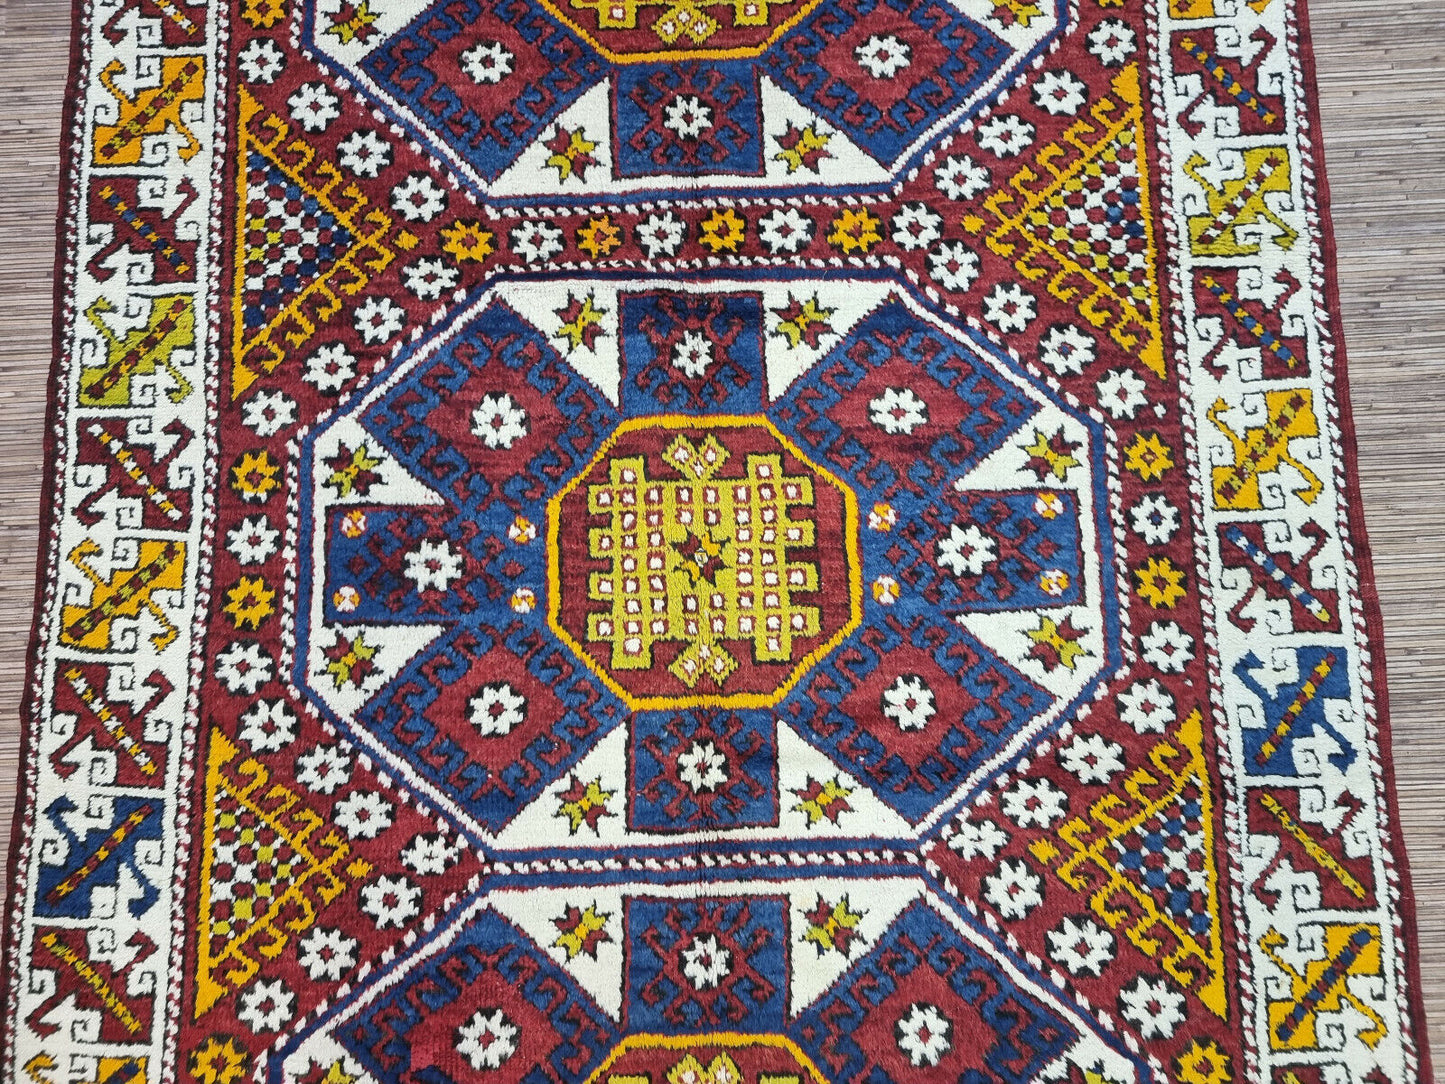 Detailed shot of the fringe at one end of the Handmade Antique Turkish Anatolian Runner Rug